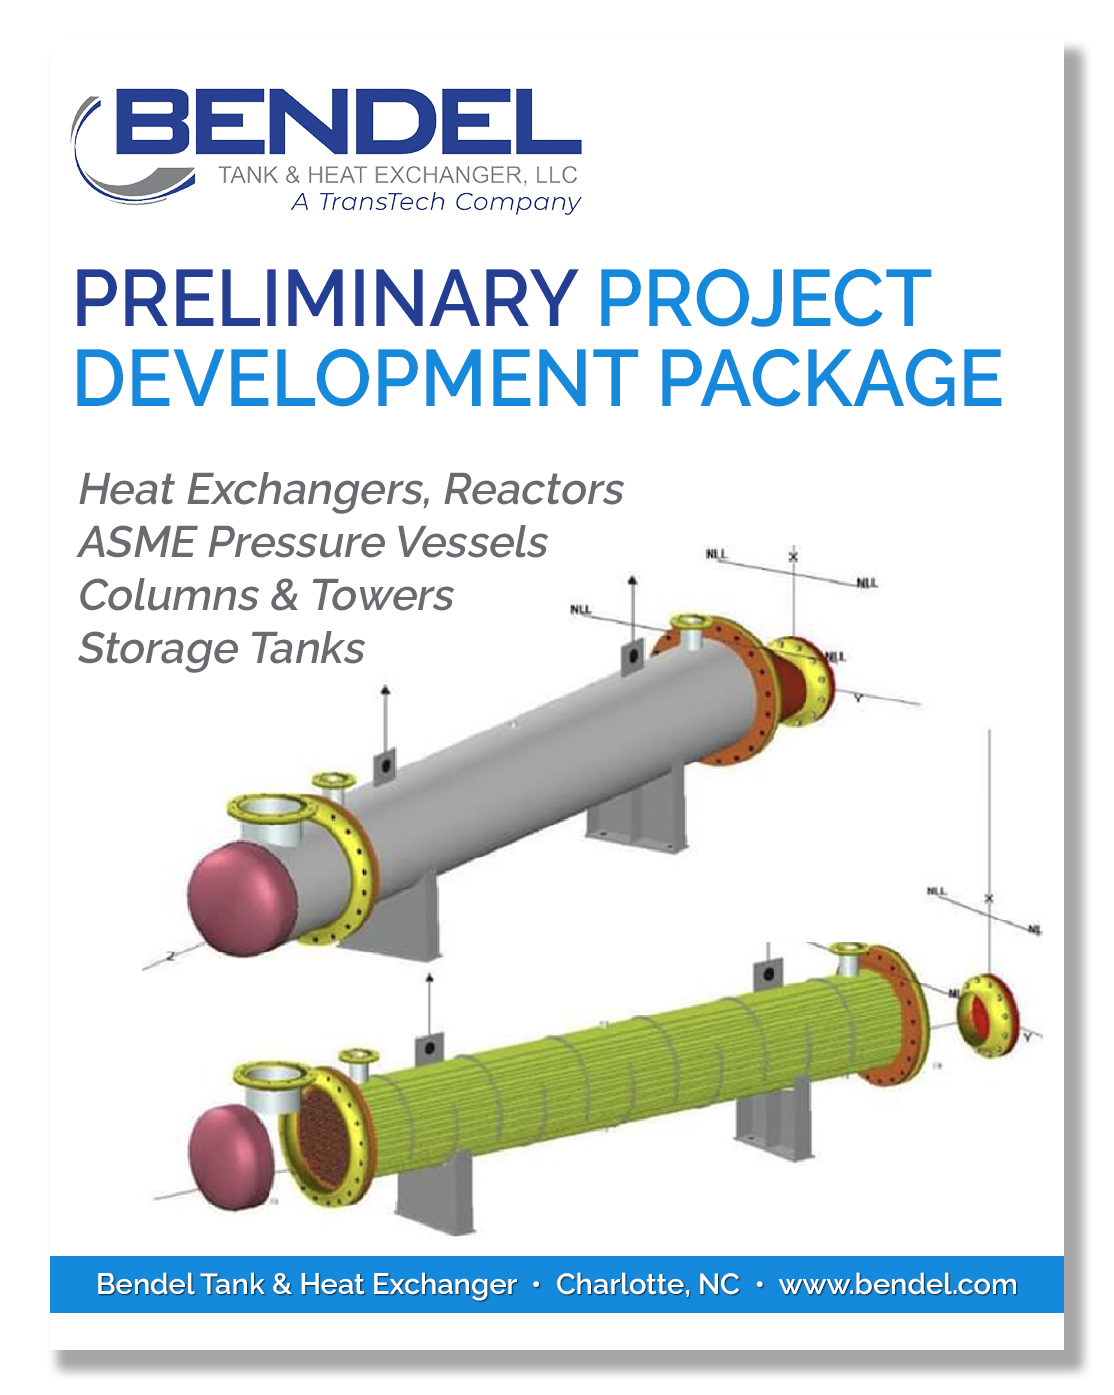 Free - Preliminary Project Development Package for Heat Exchangers - Pressure Vessels - Reactors - Columns & Towers - Storage Tanks -2